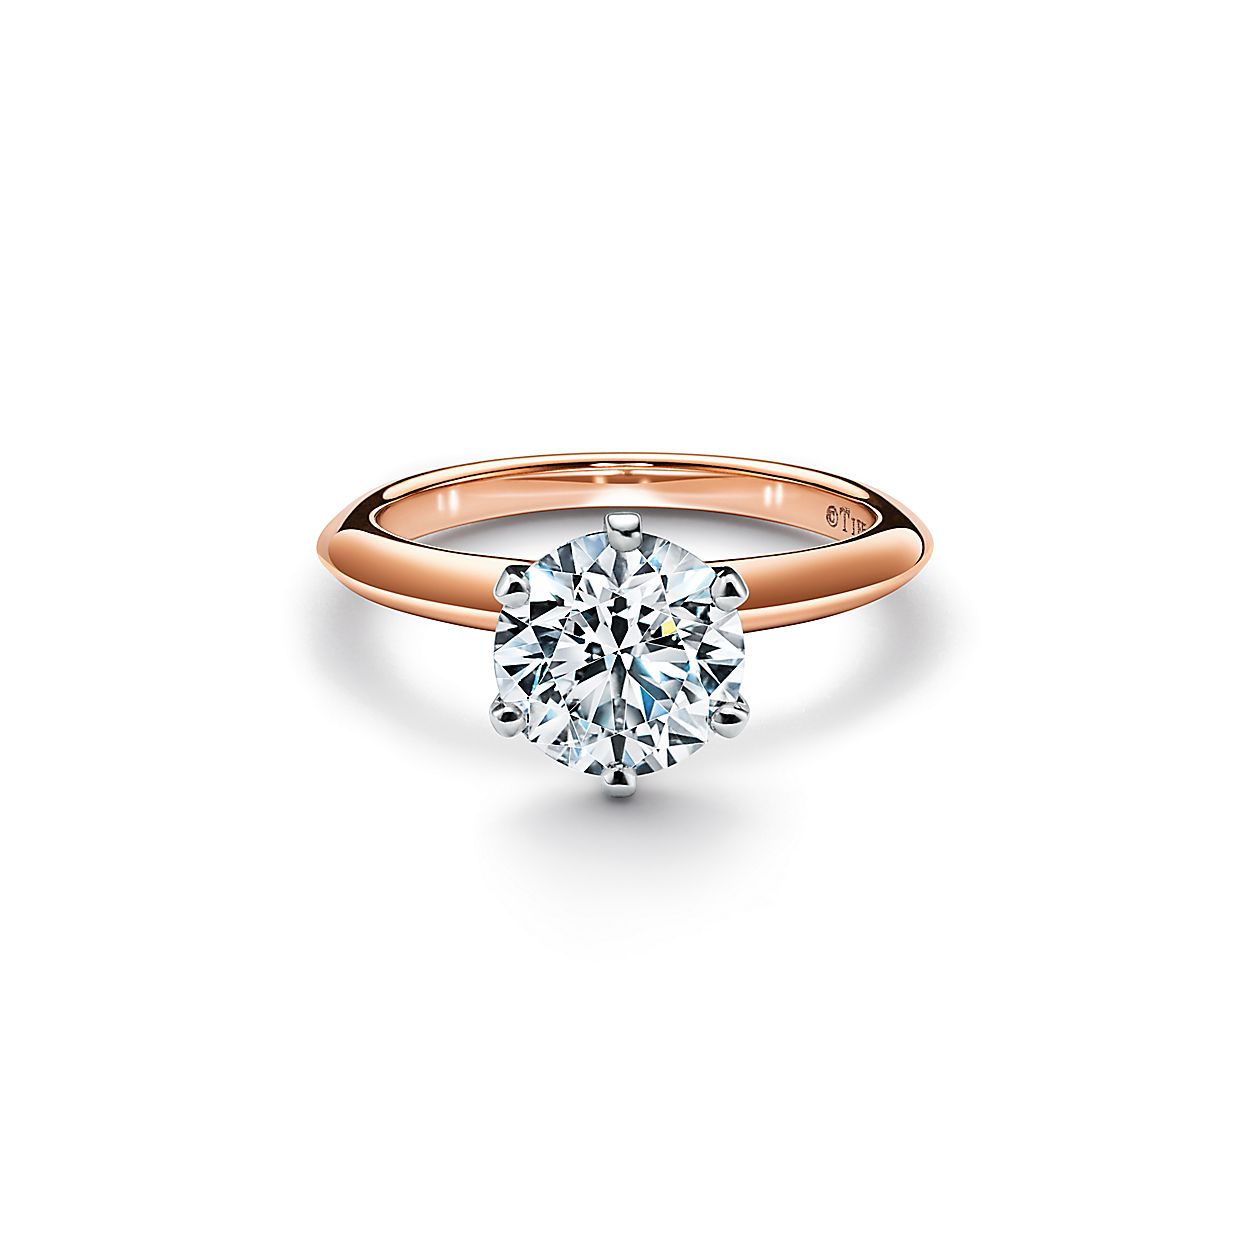 The Tiffany Setting In 18k Rose Gold World S Most Iconic